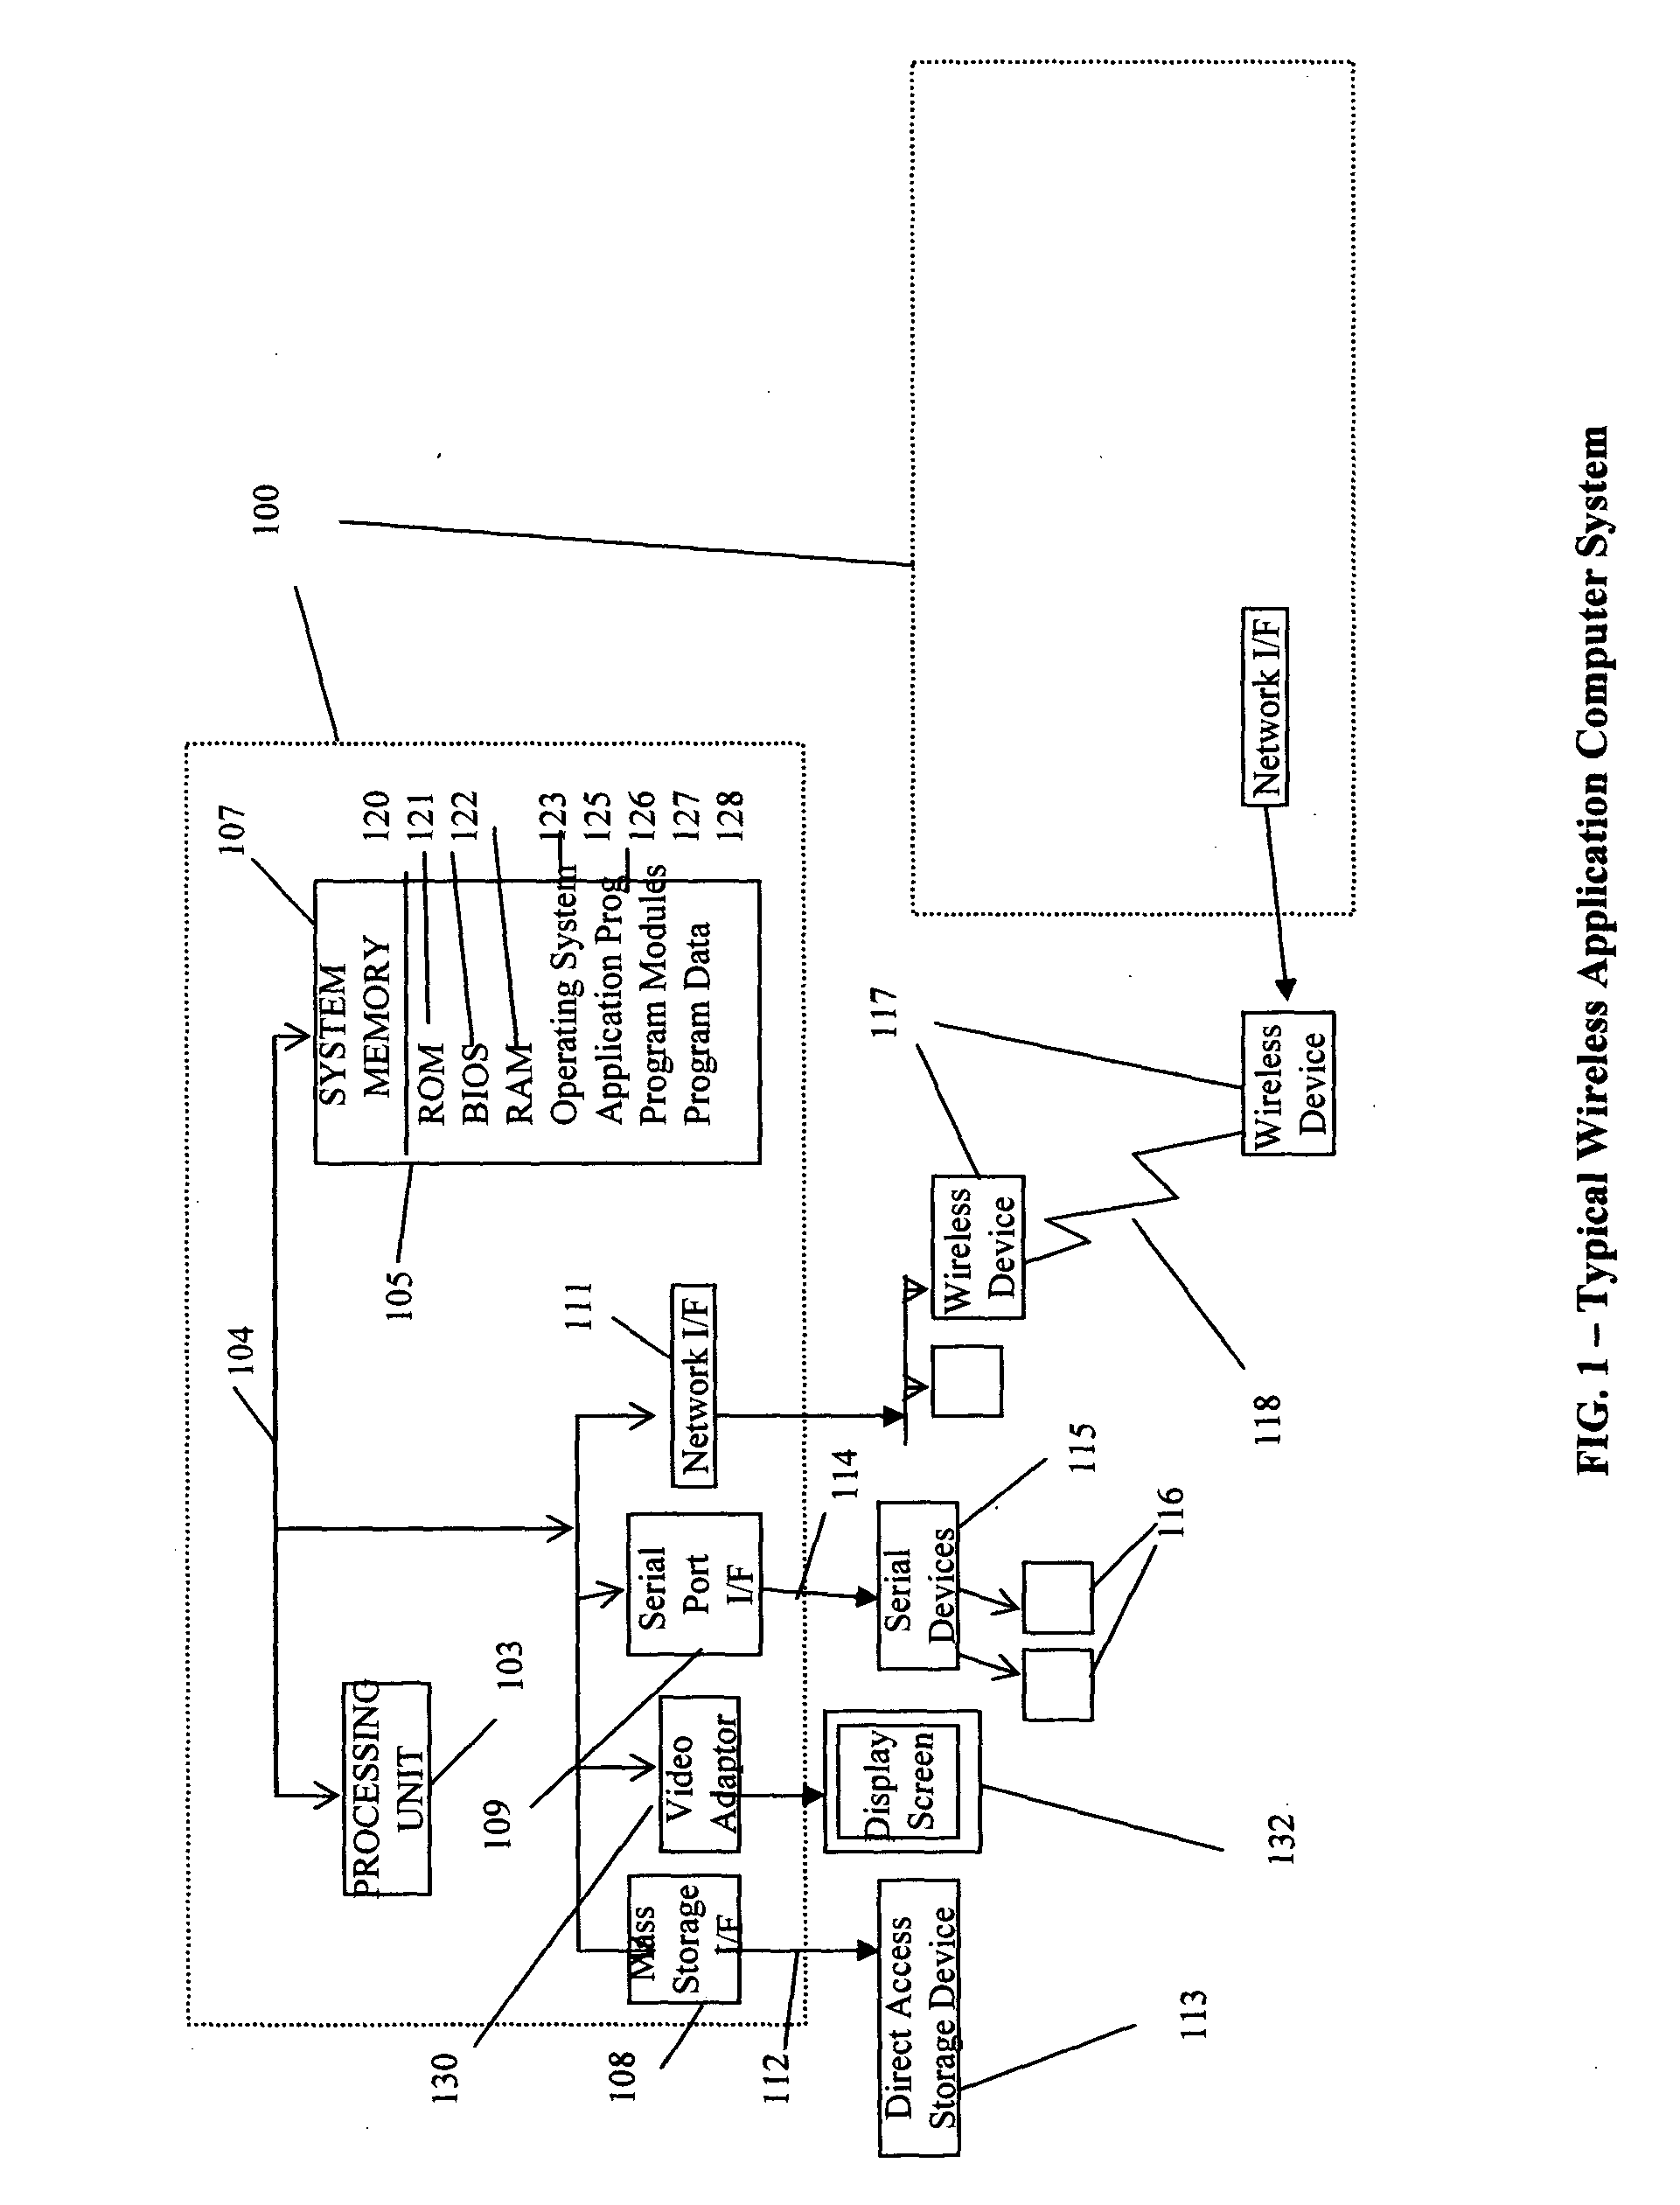 Method and system for providing wireless communications between electronic devices